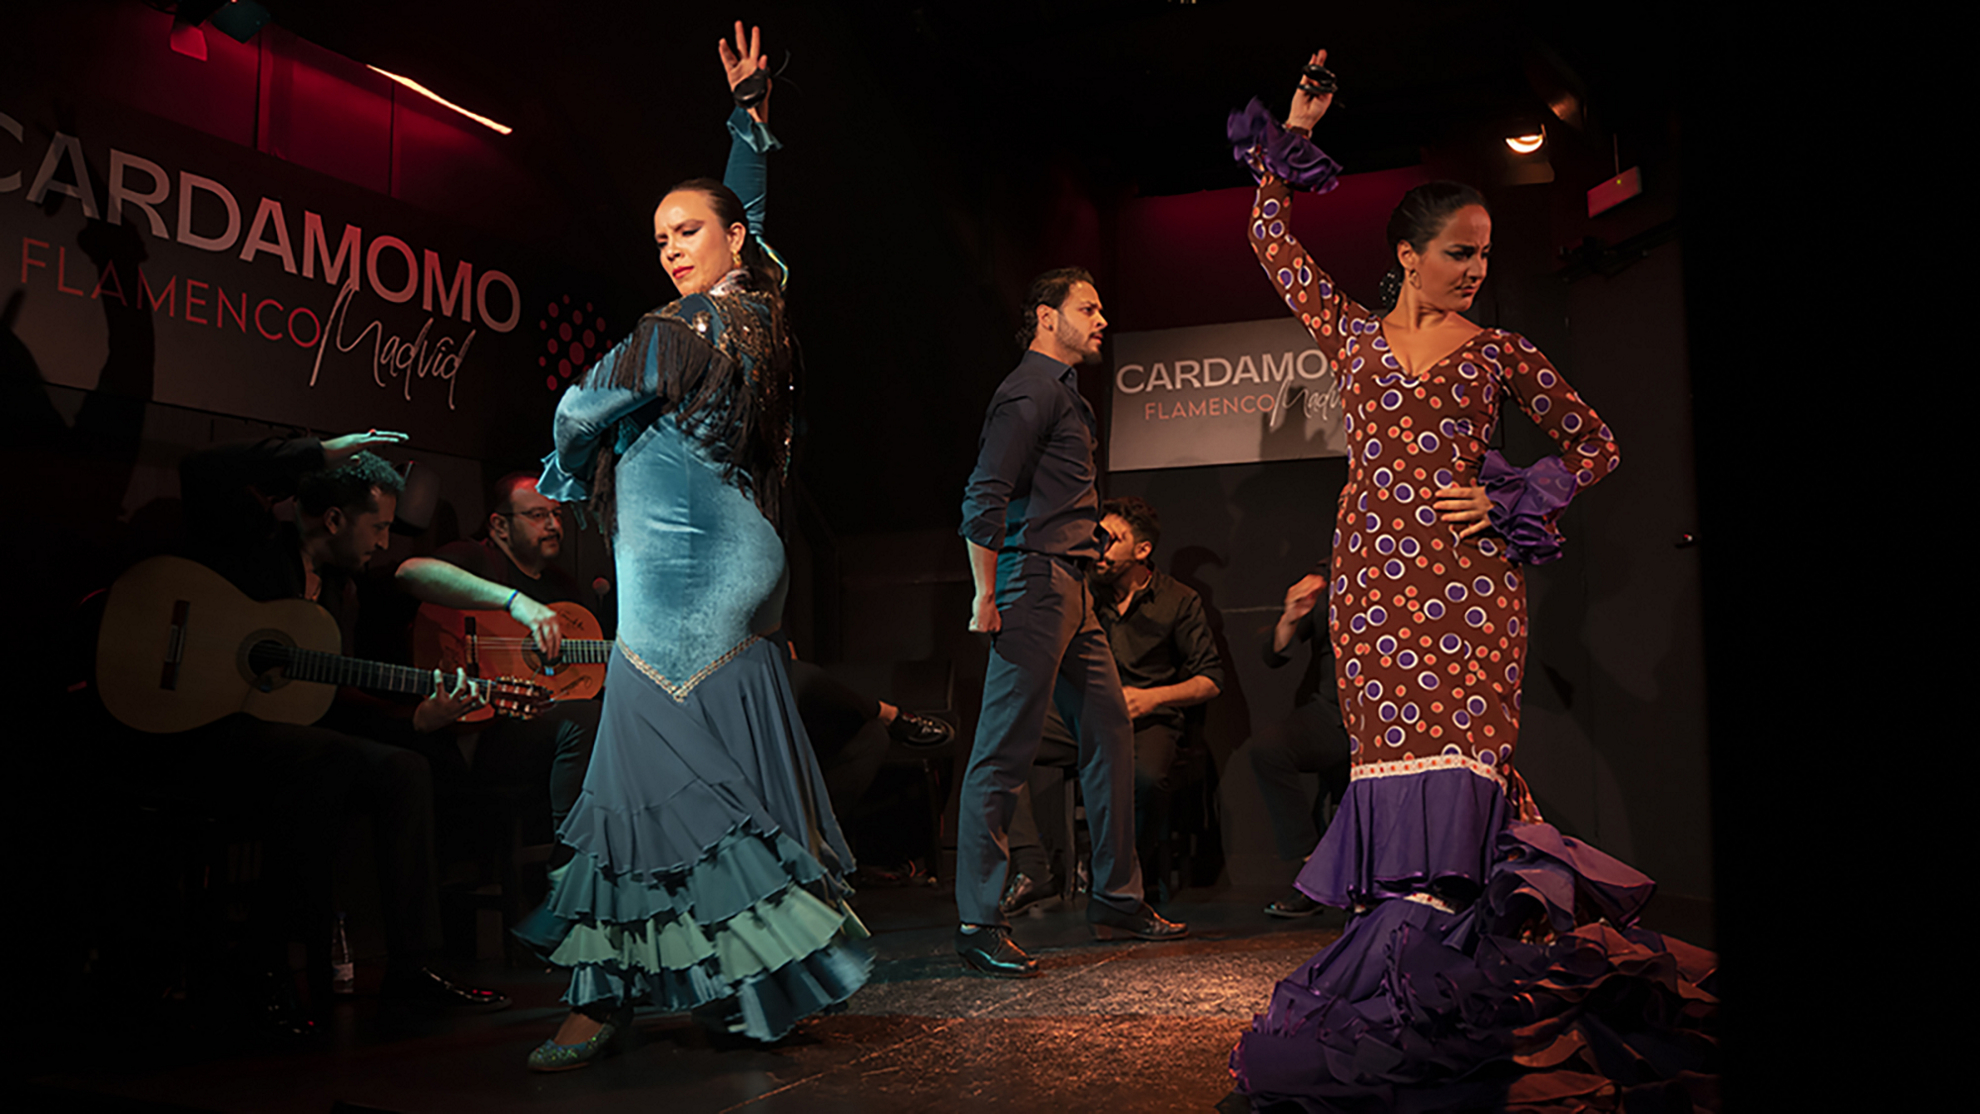 Cardamomo: Two women dressed in flamenco dresses dancing on stage